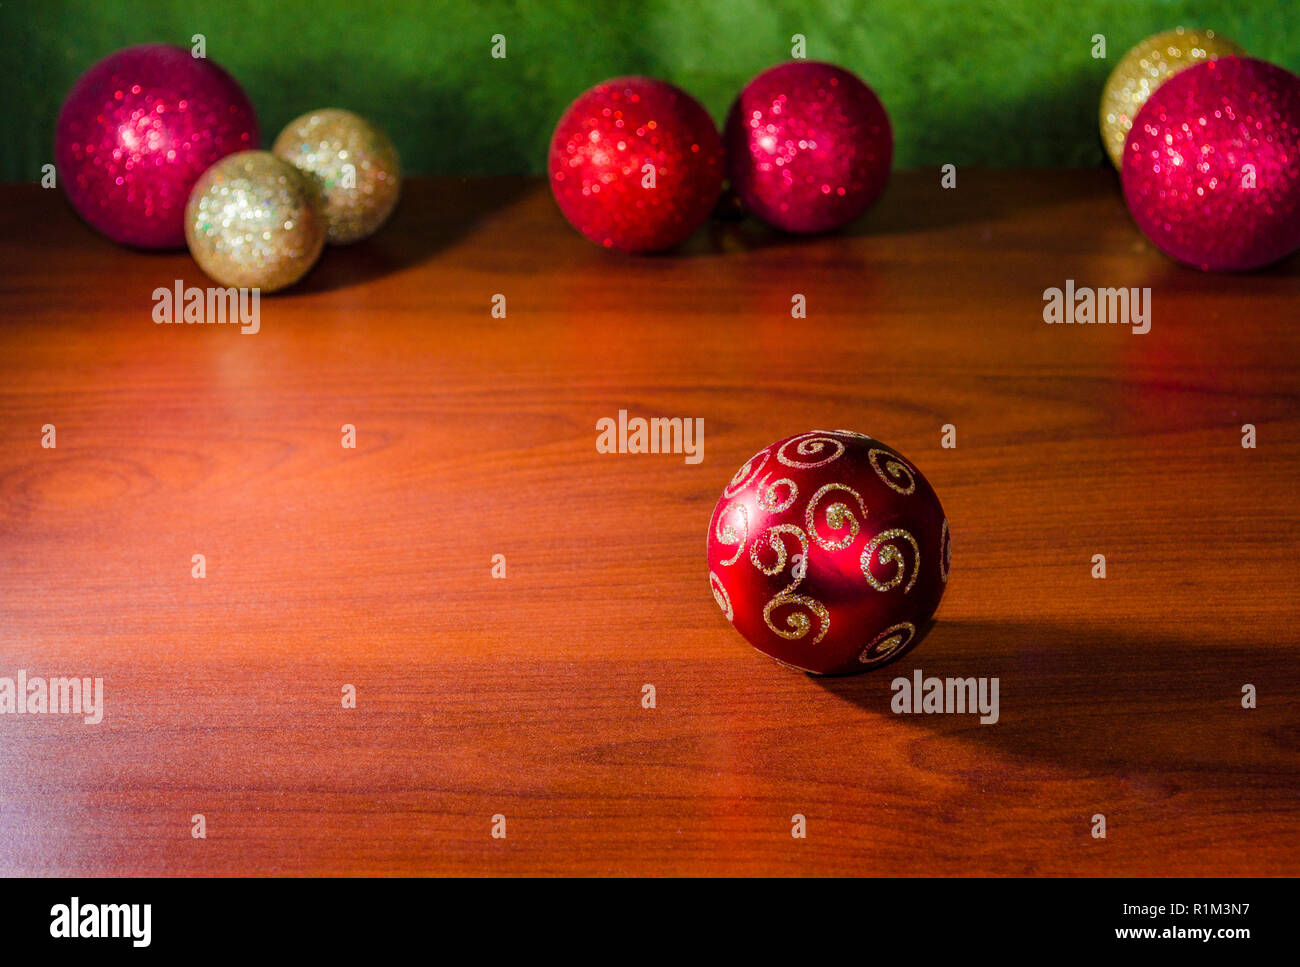 christmas background with shiny ball ornaments Stock Photo